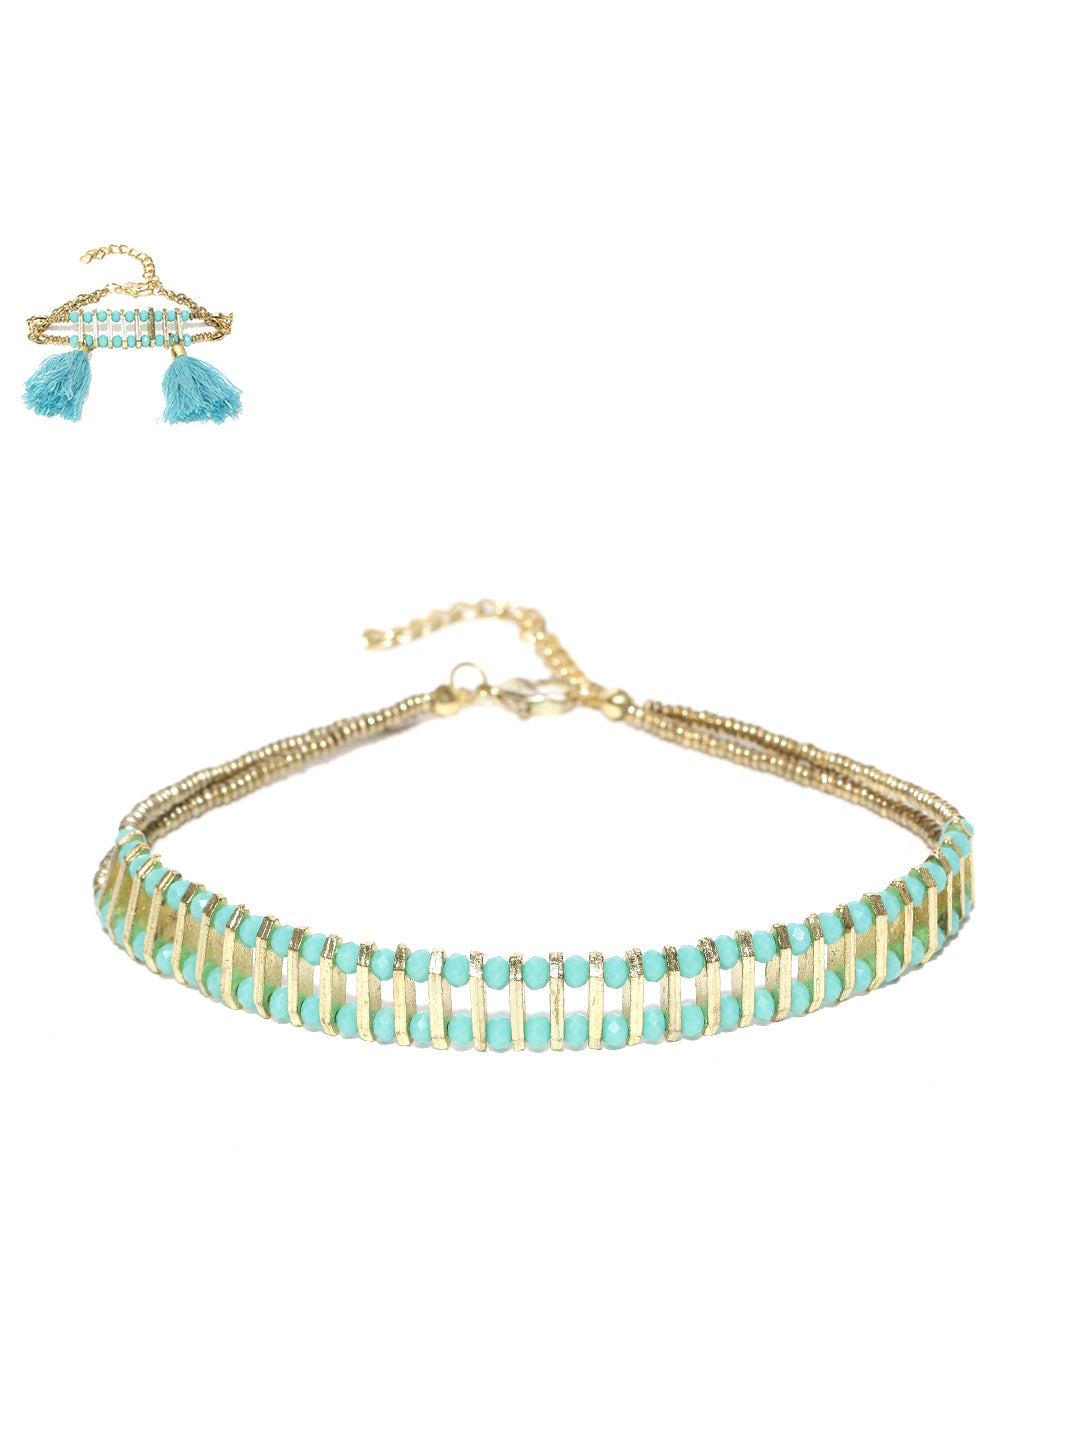 Gold and blue toned choker and bracelet set